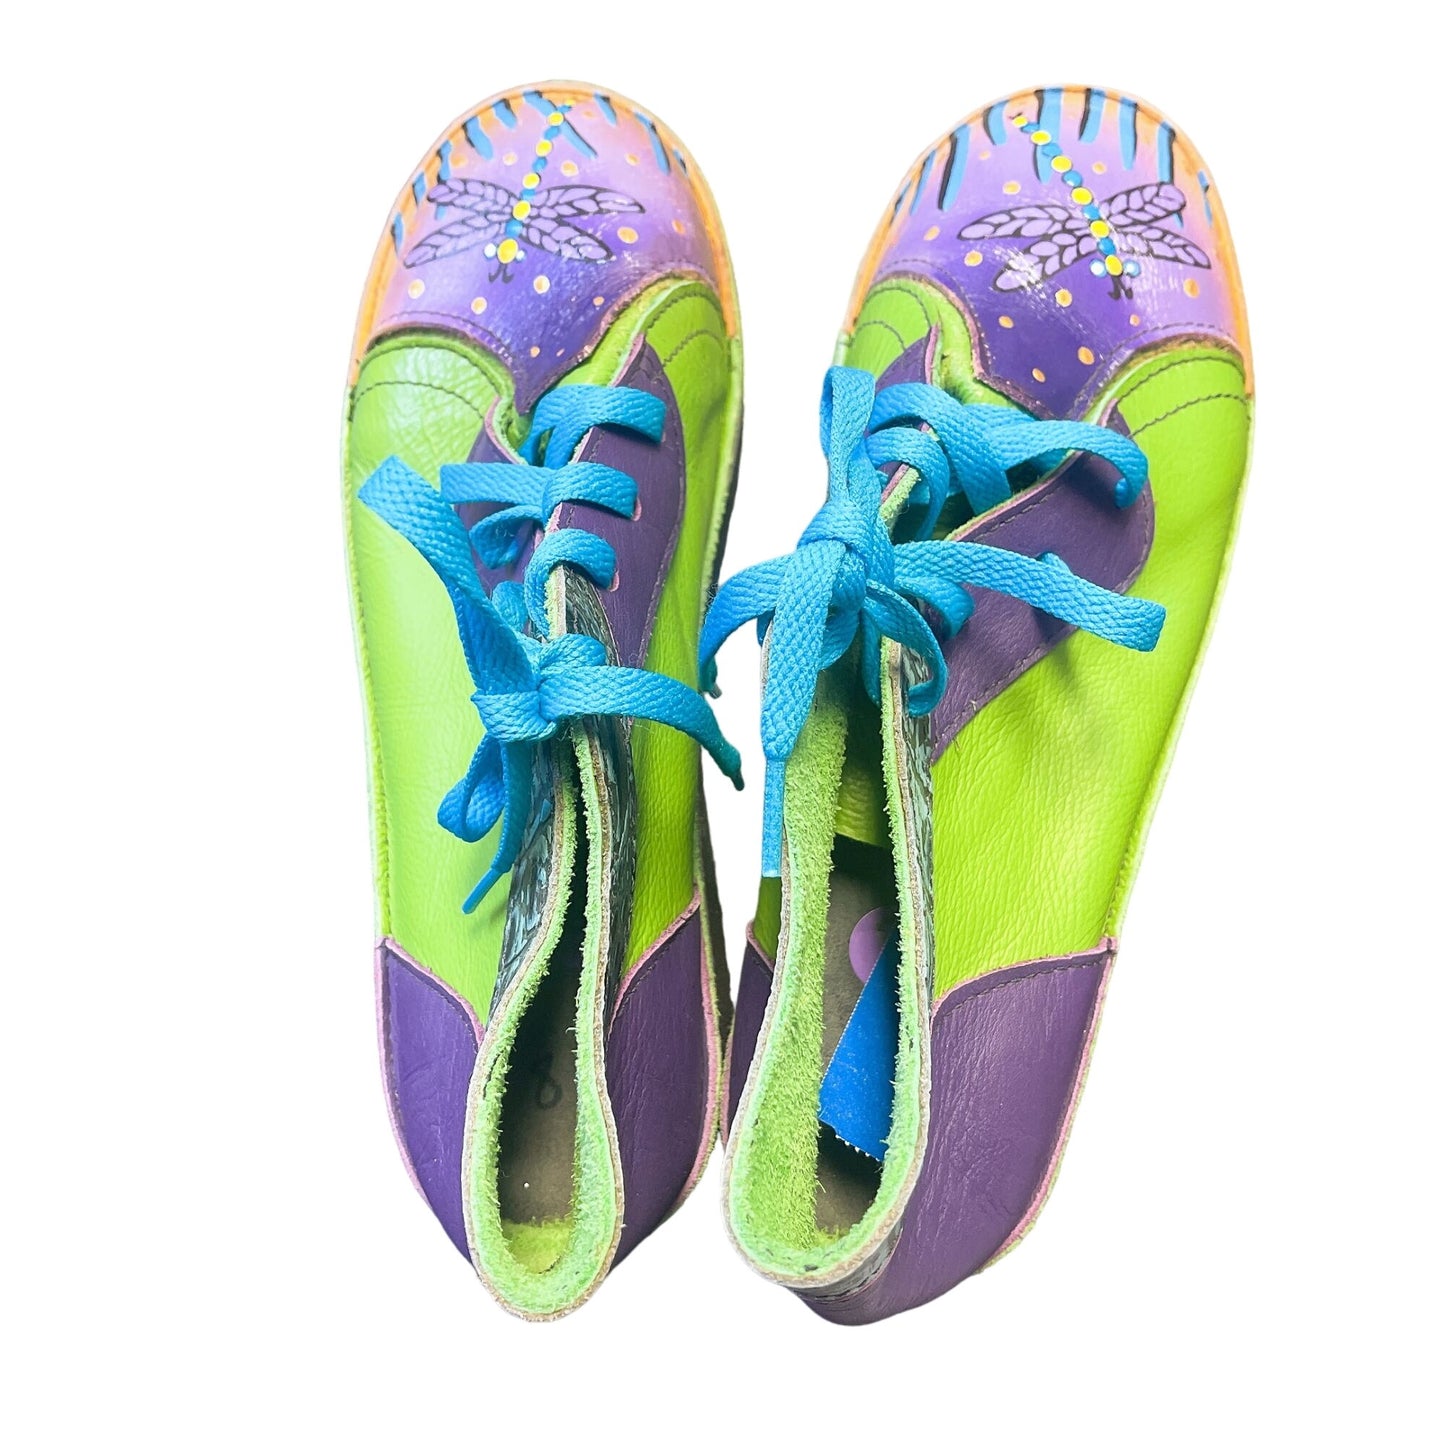 Soletech Green & Purple Leather Print Lace-up Shoes Size 8